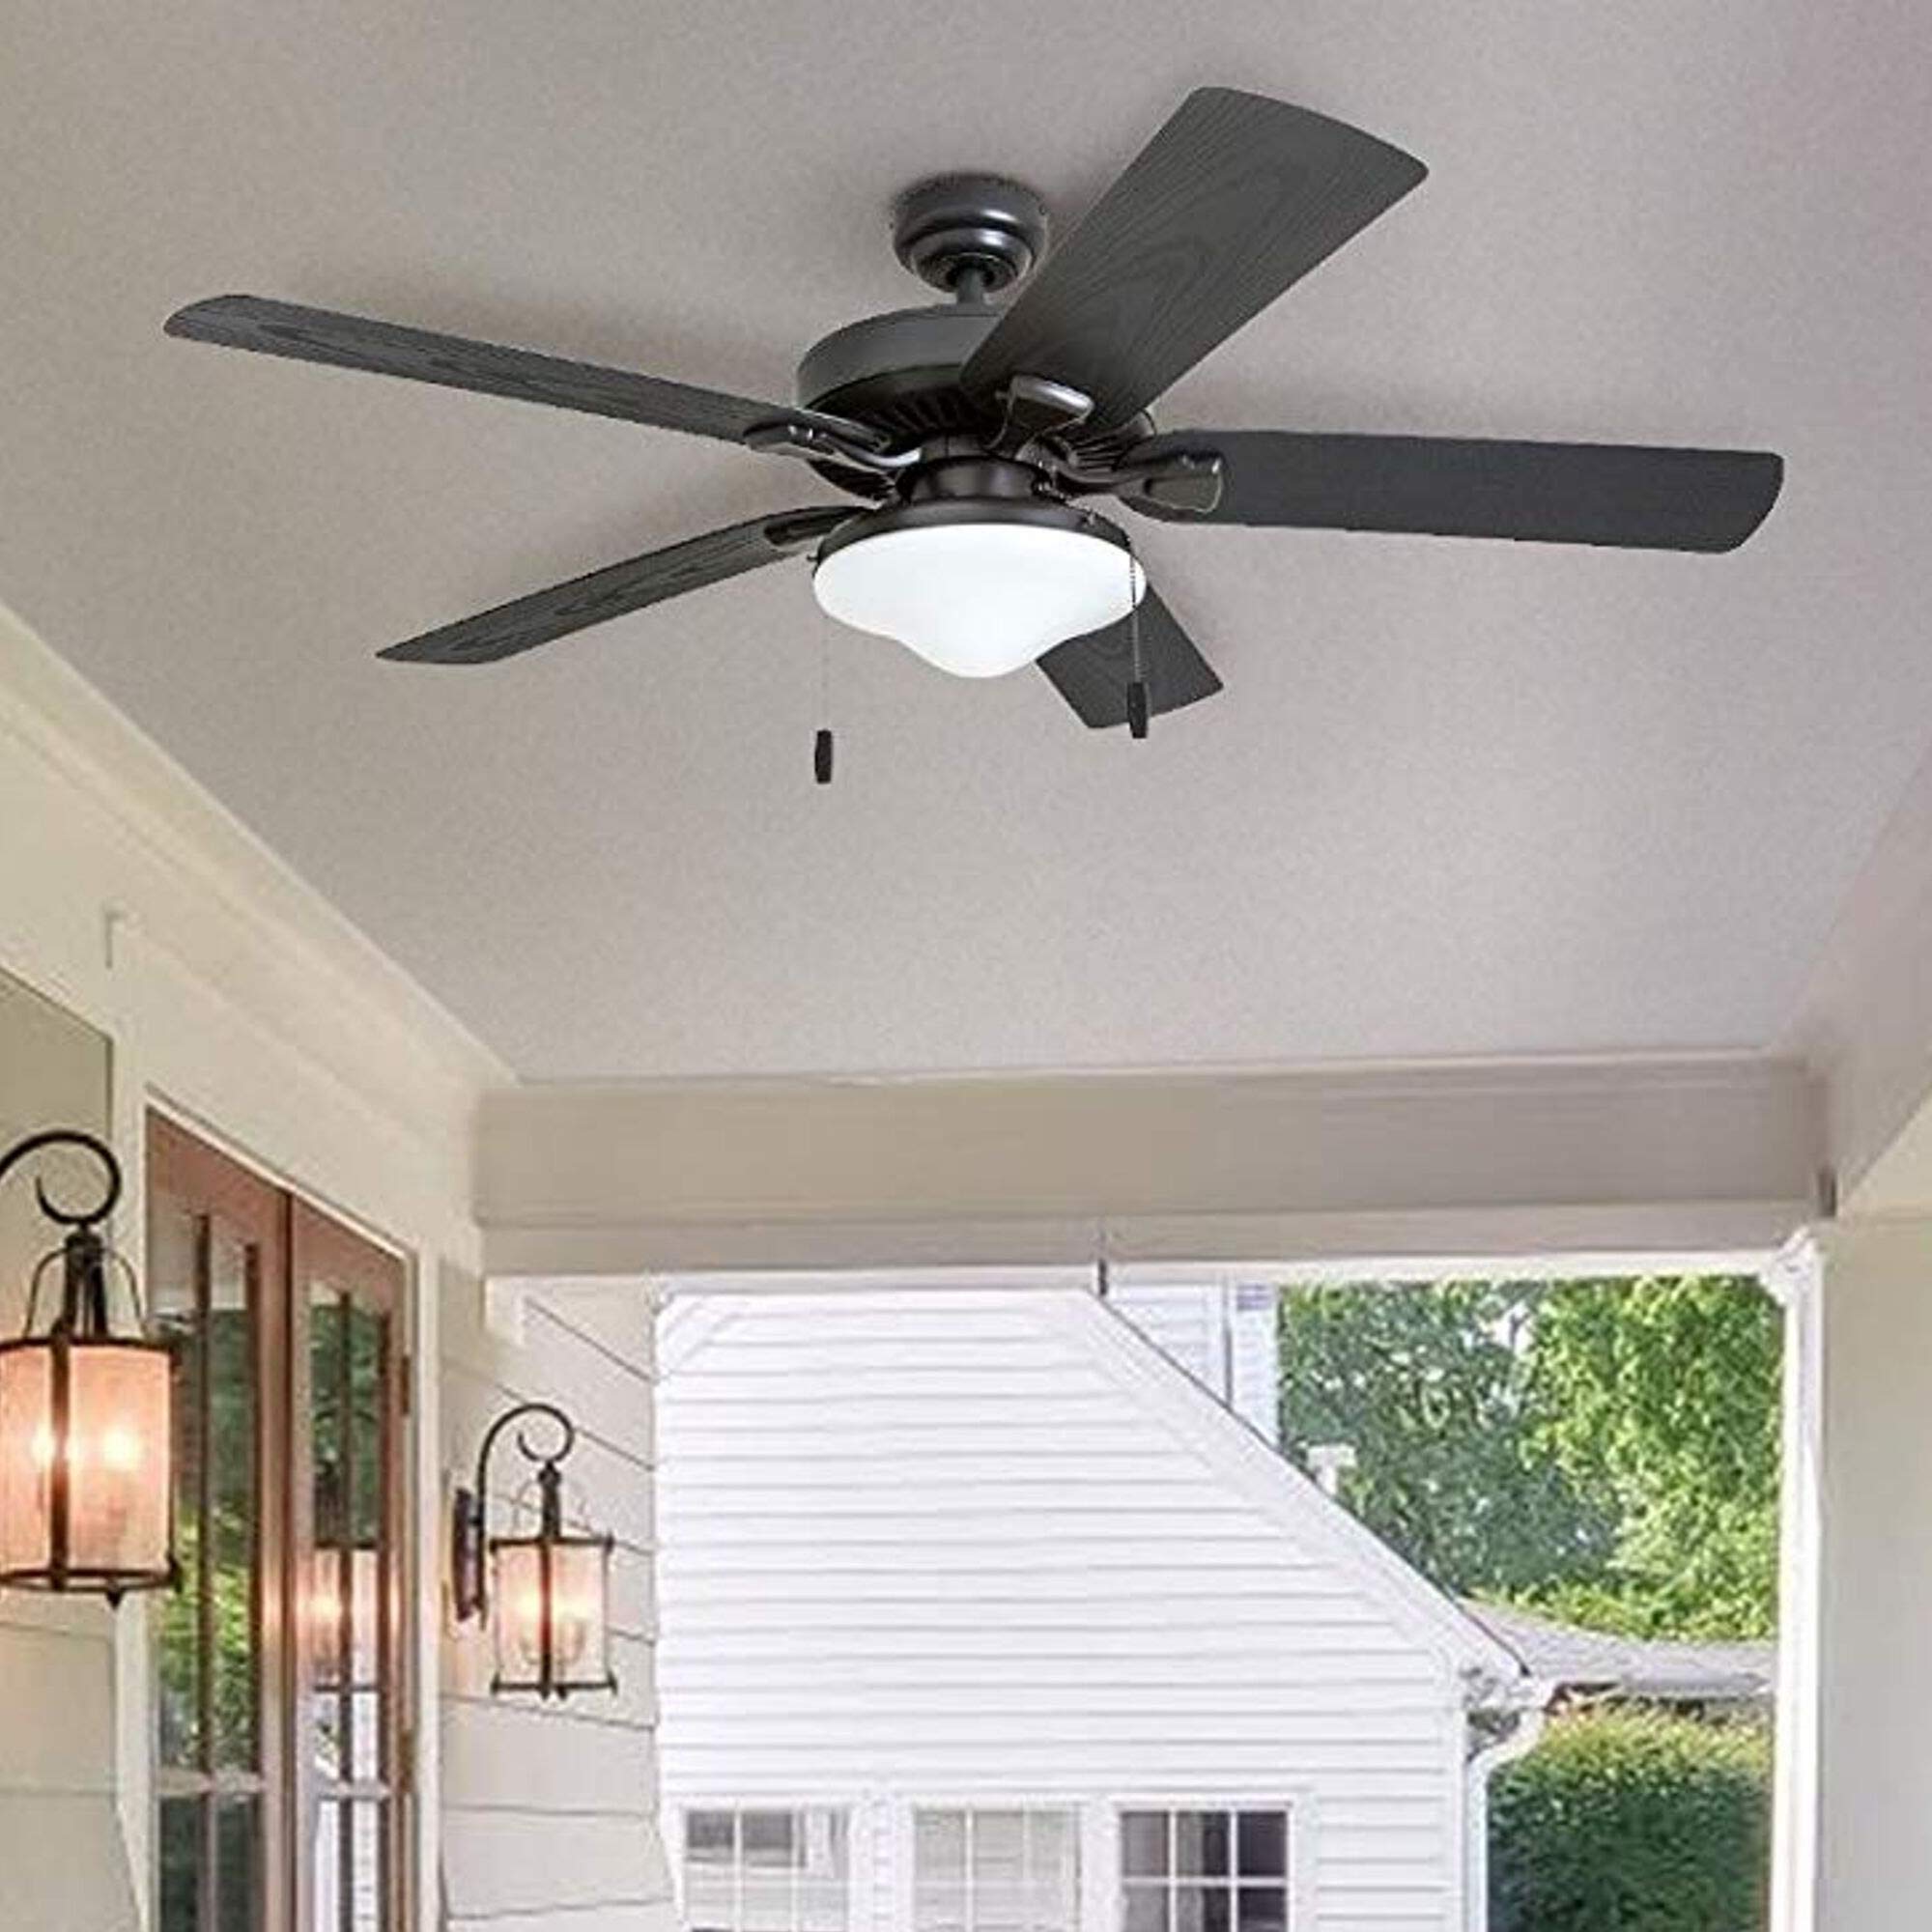 Honeywell Ceiling Fans Belmar, 52 Inch Traditional Indoor Outdoor LED Ceiling Fan with Light, Pull Chain, Three Mounting Options, ETL Damp Rated, Reversible Motor - 50512-01 (Bronze)